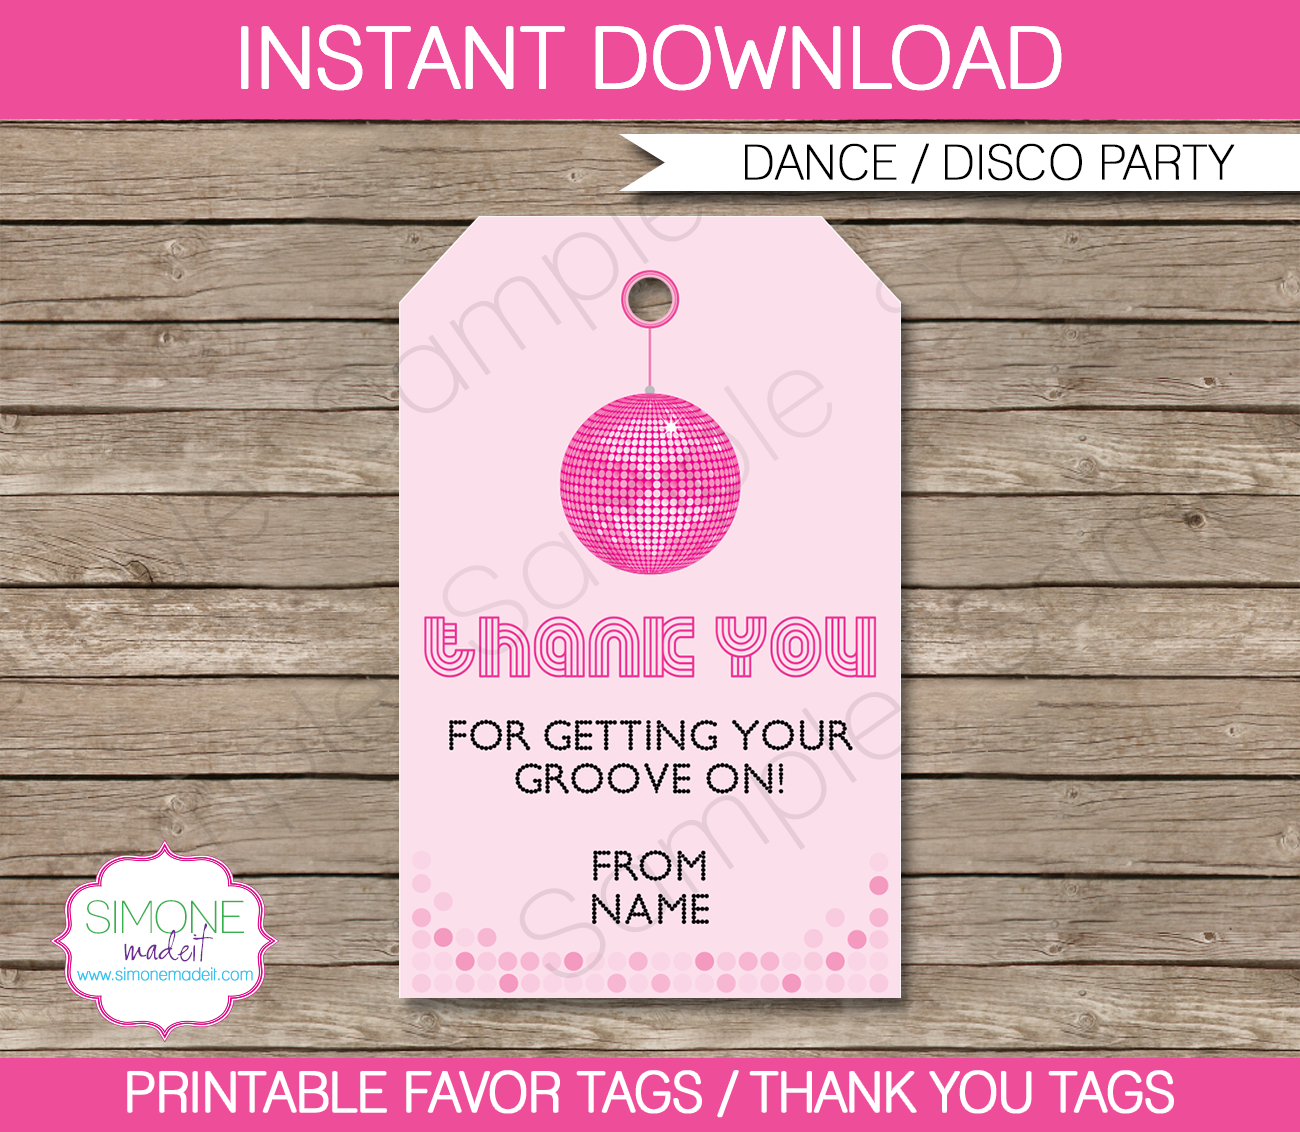 Dance Party Favor Tags | Thank You Tags | Disco Birthday Party | Editable DIY Template | $3.00 INSTANT DOWNLOAD via SIMONEmadeit.com